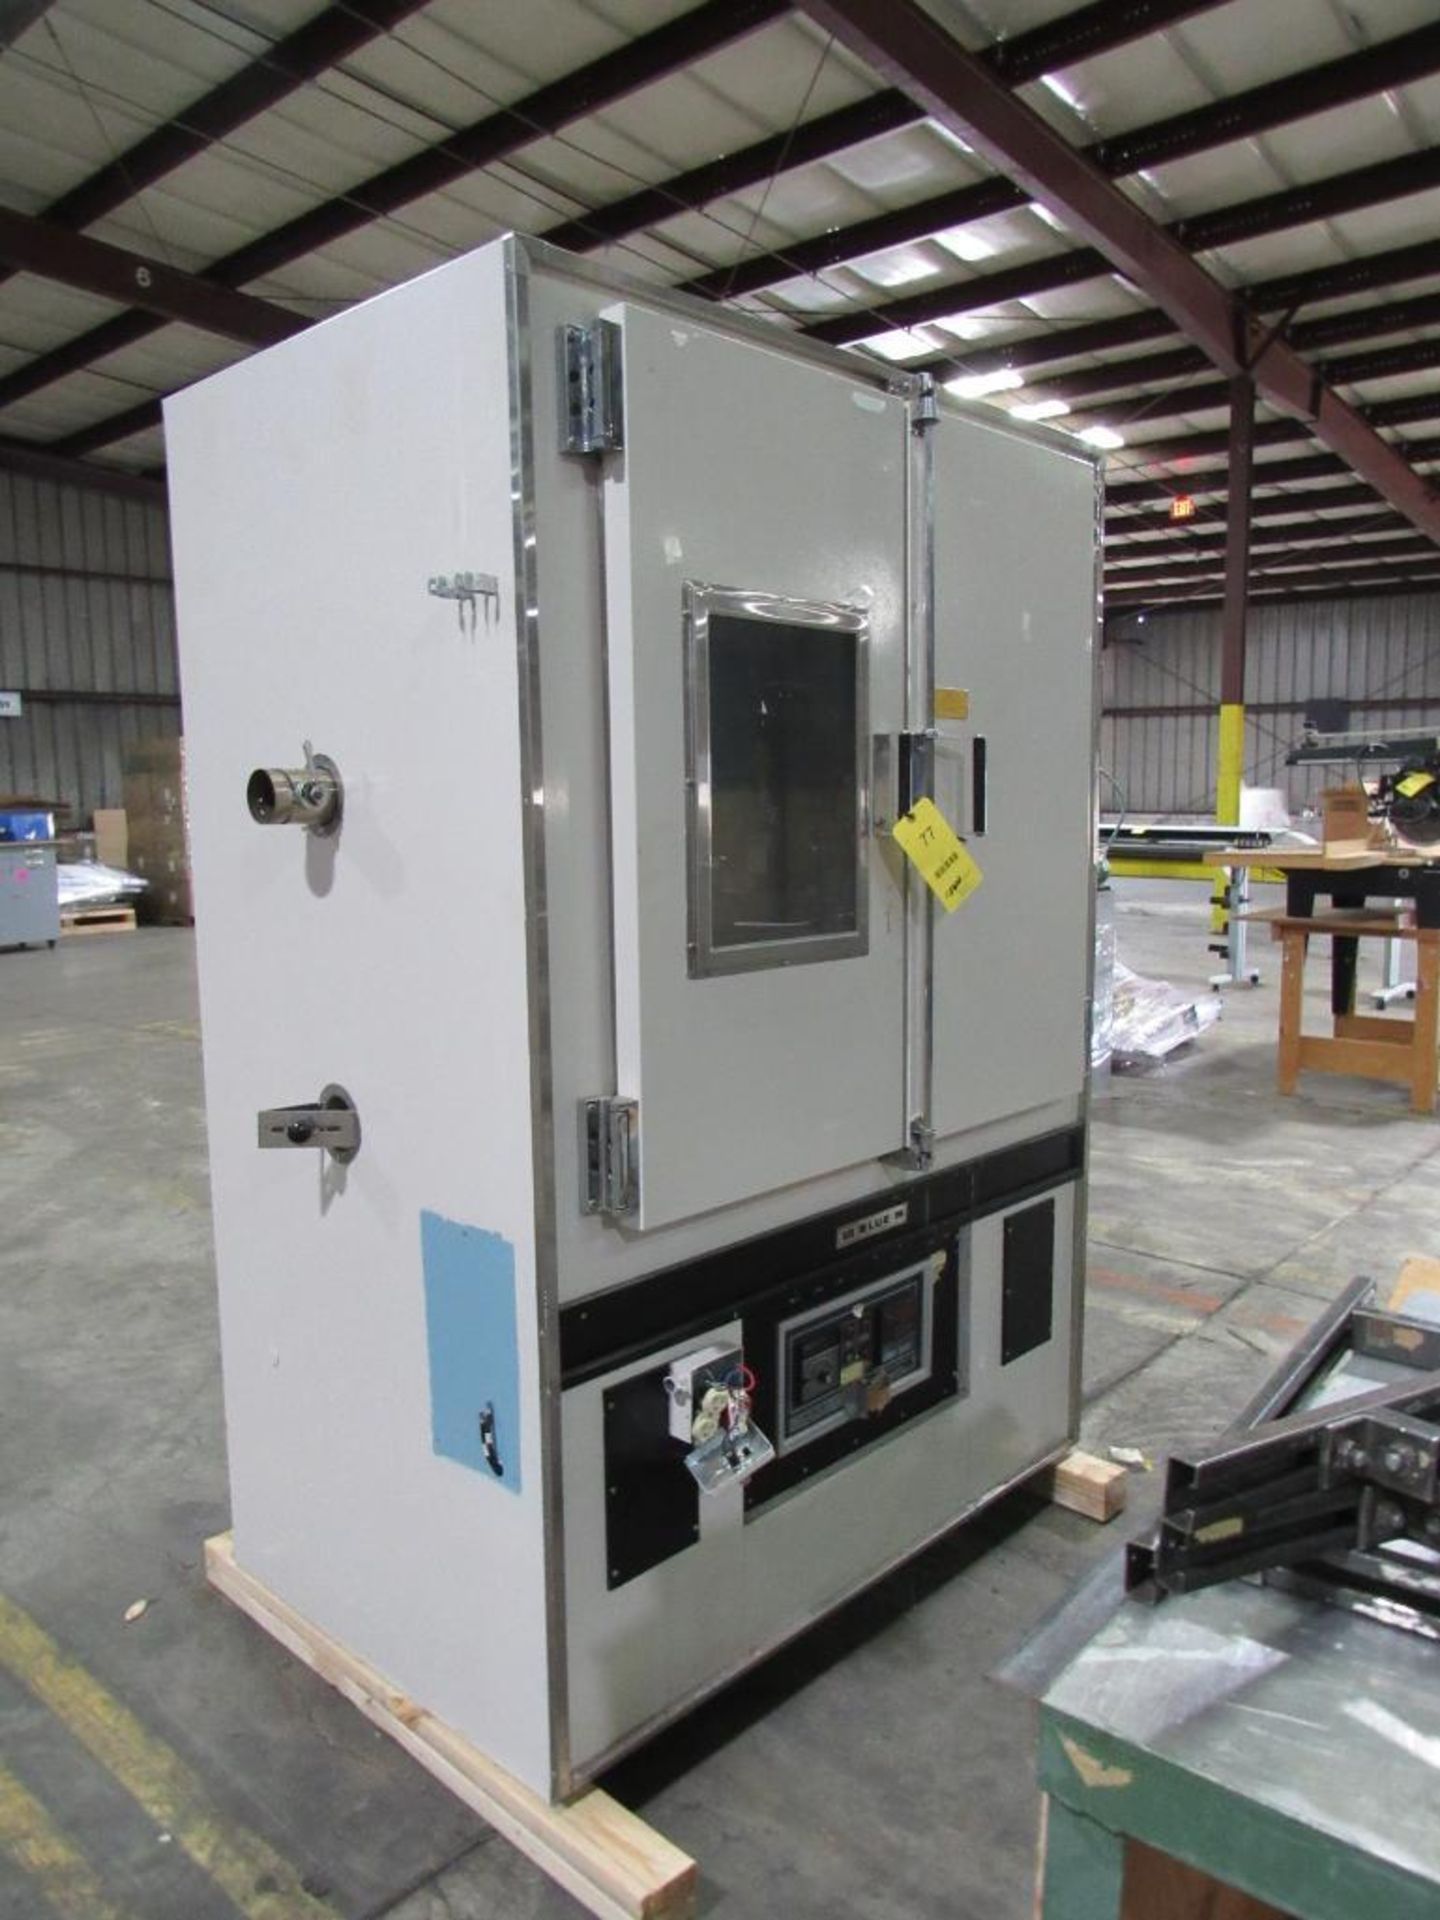 Blue M Electric Double-Door Batch Oven Model DC1506C, S/N DC6692 (LOCATED IN SOUTH MILWAUKEE, WI) - Image 2 of 4